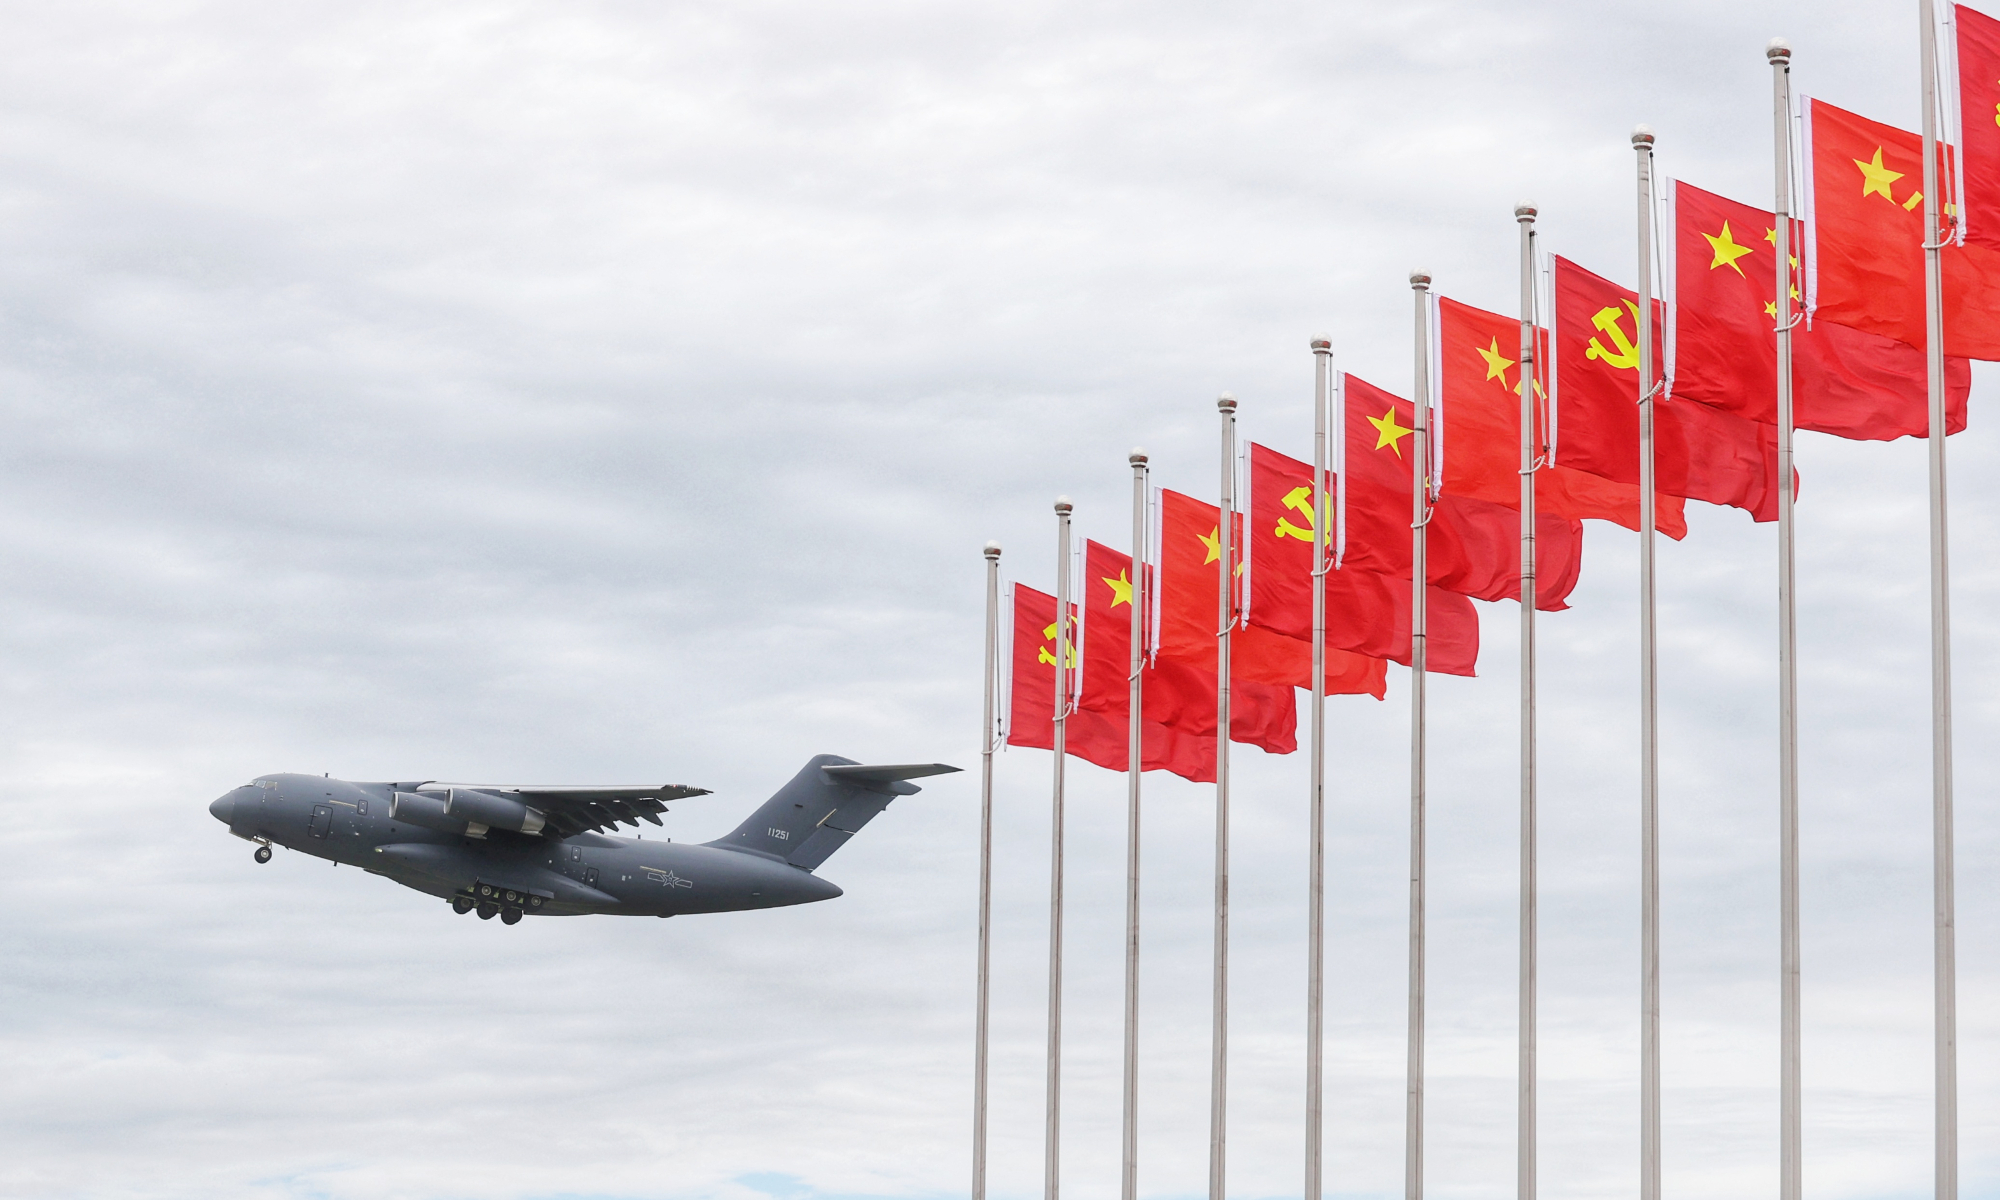 The PLA Air Force open day event kicked off in Changchun, NE China's Jilin on Friday. During Friday's air show, the Y-20, J-20, J-16 and other star fighter jets were on full display. The PLA Air Force's August 1 aerobatics team also delivered a wonderful aerial display. (Photos: Cui Meng/GT)